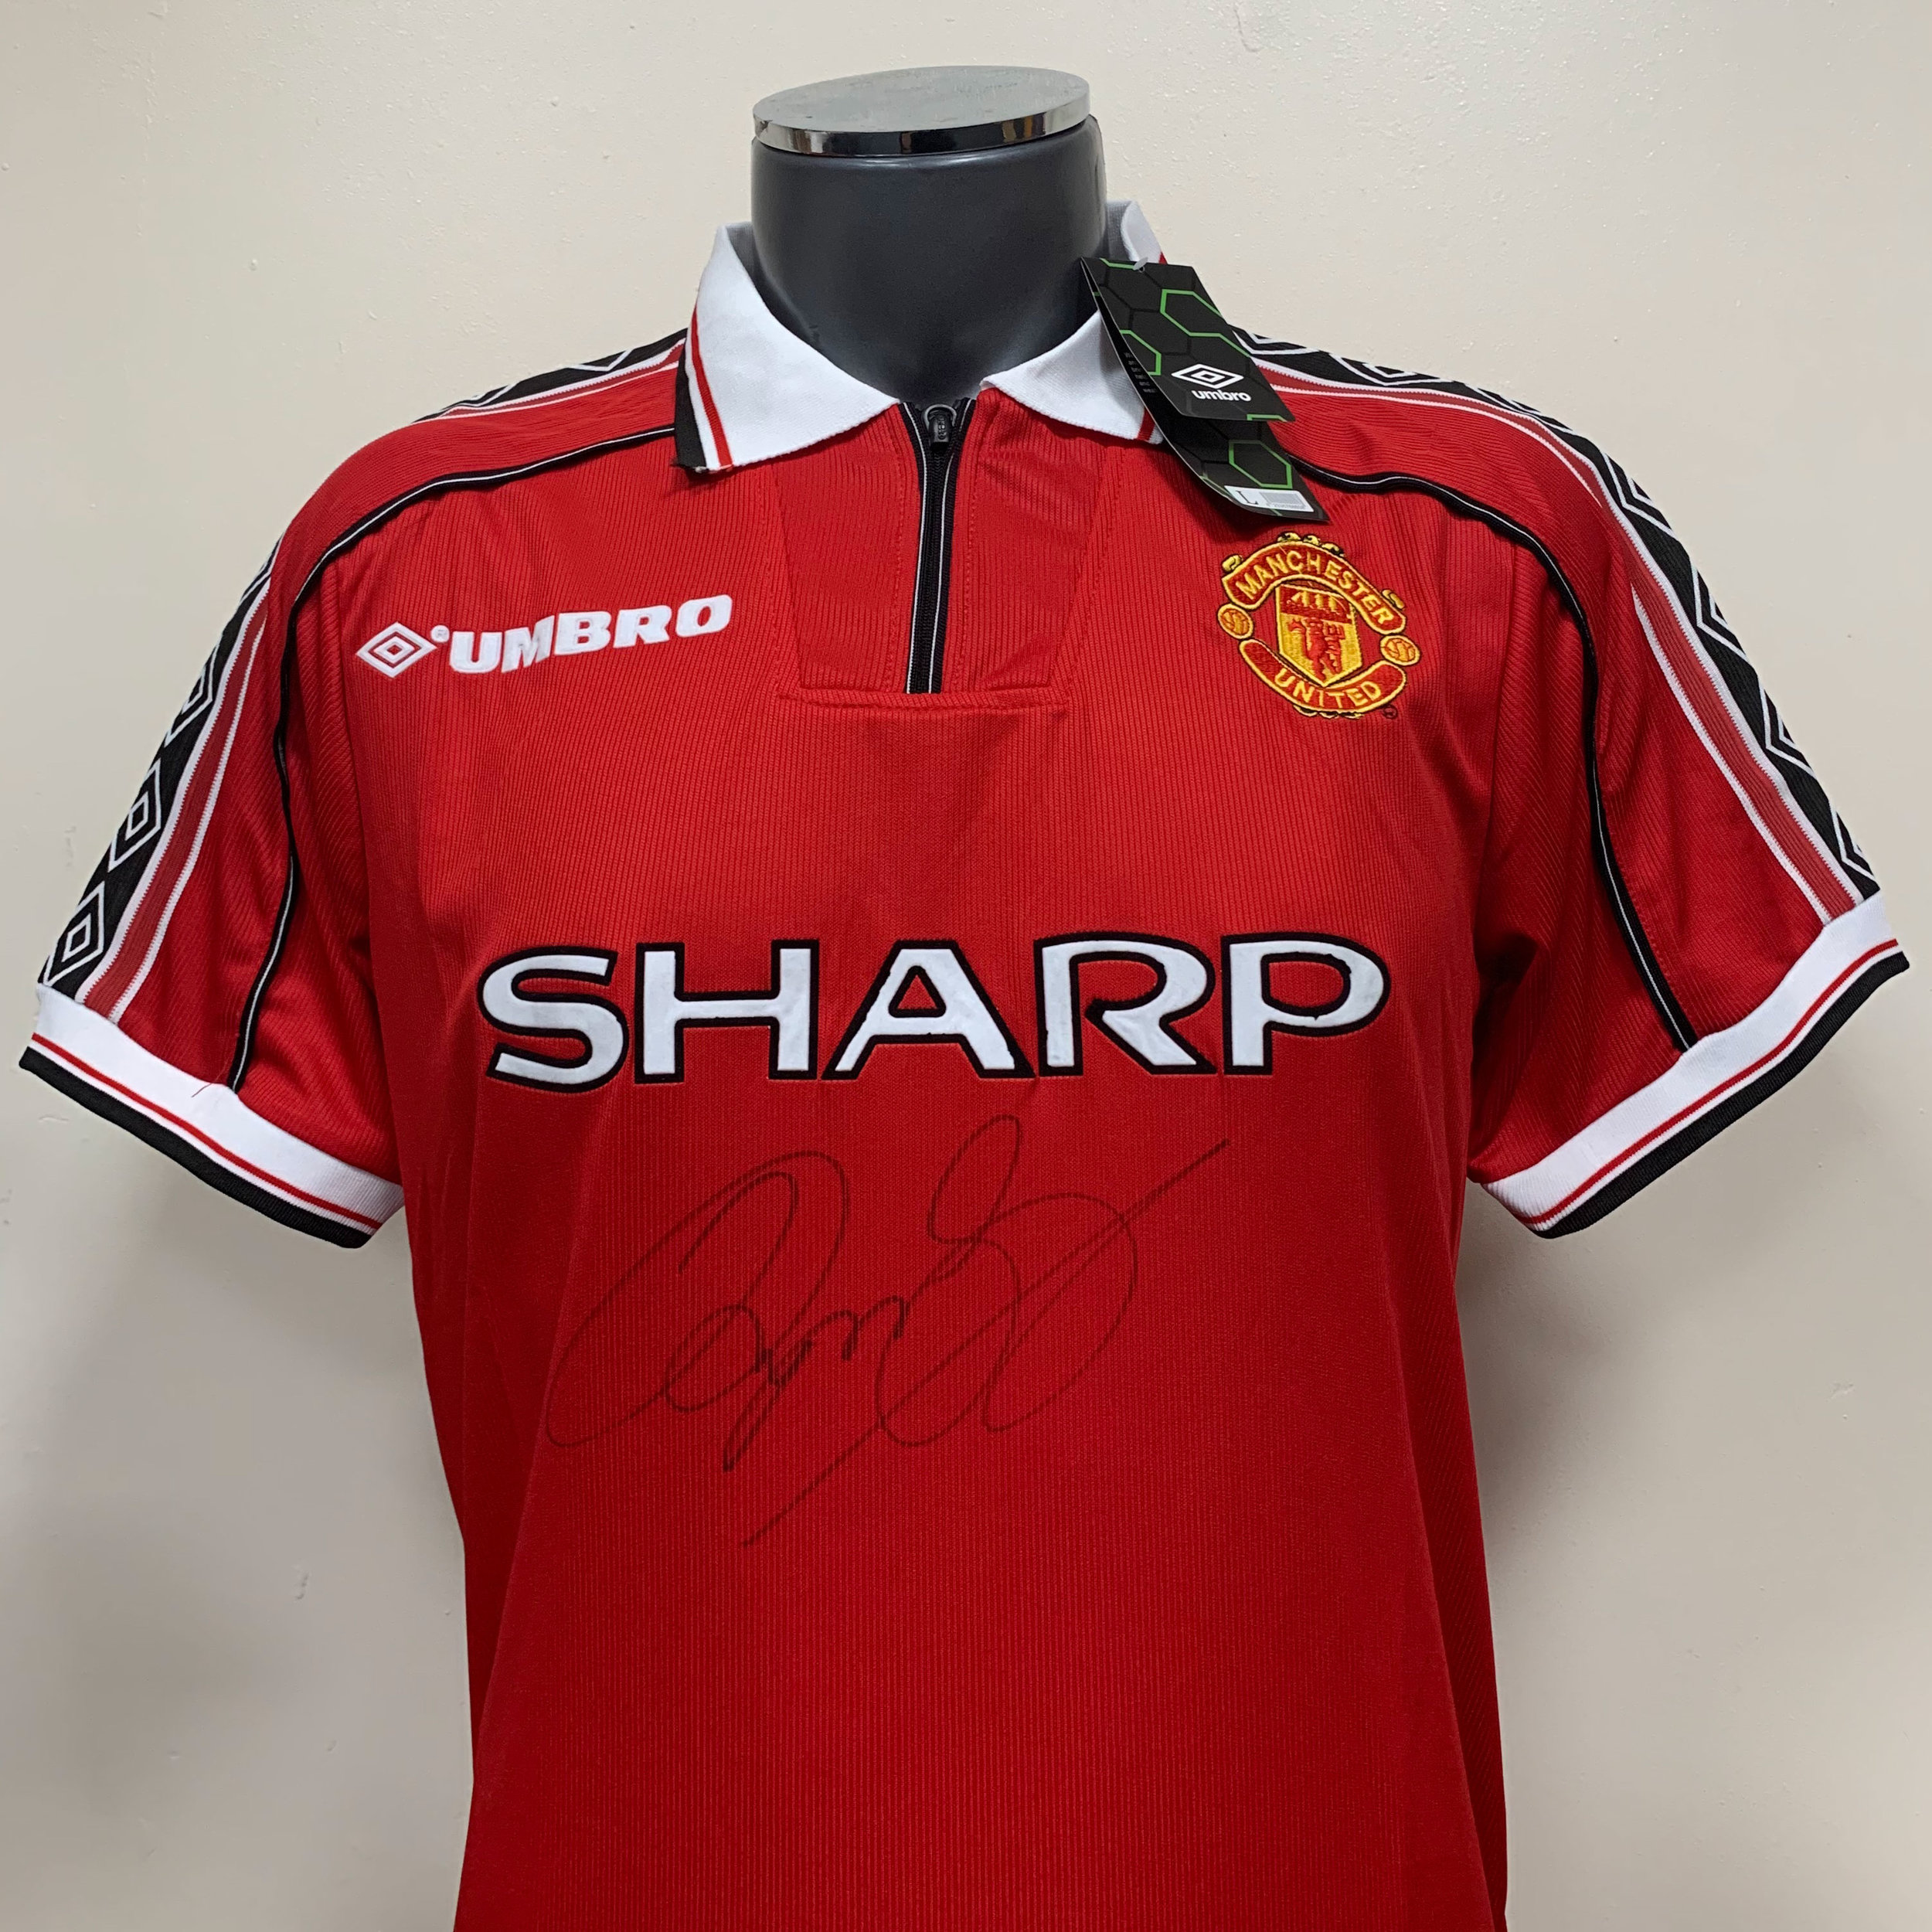 ryan giggs jersey number